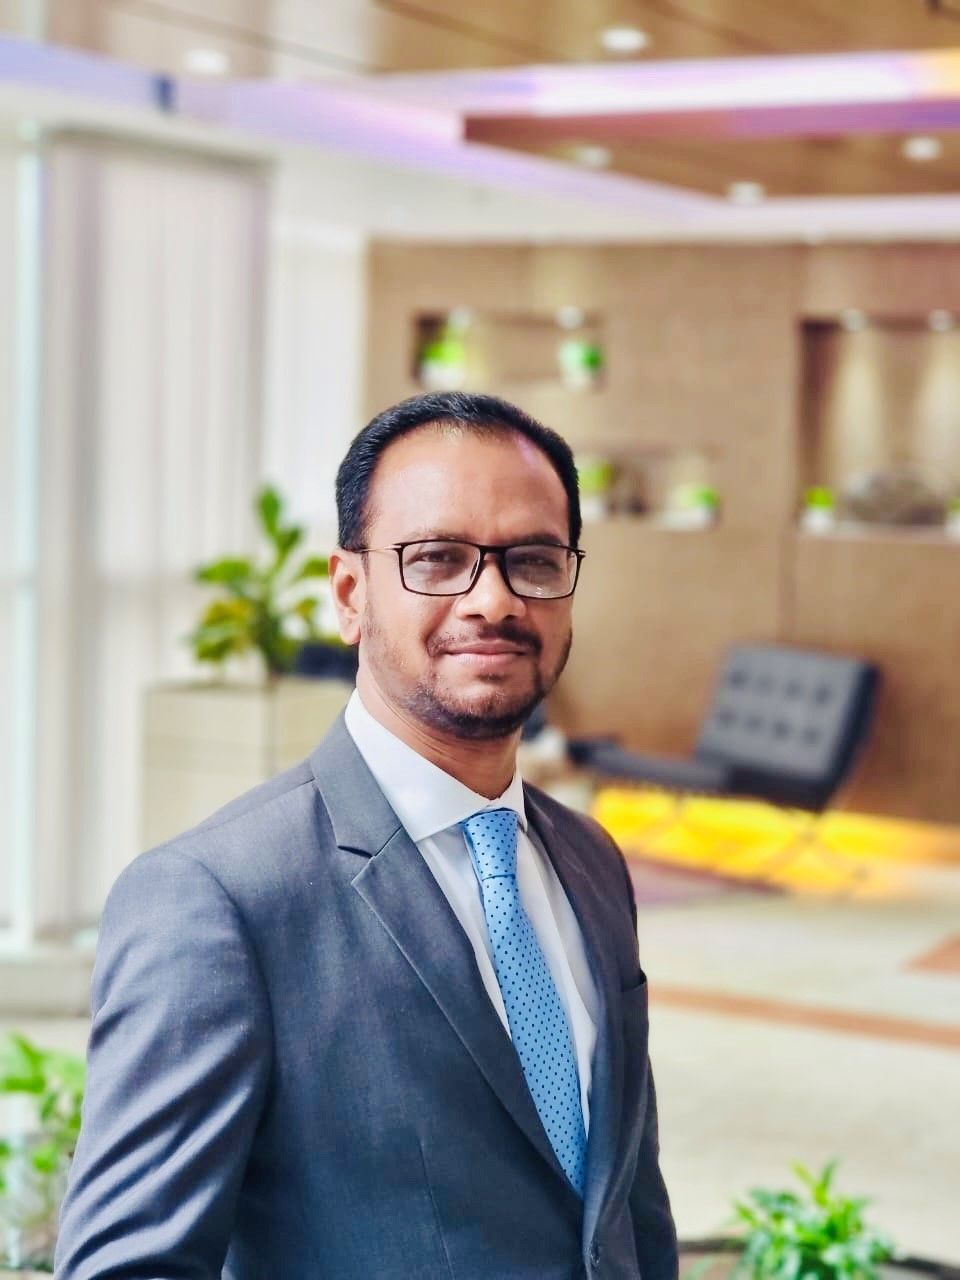 Mr. Anisur Rahman Chief Information Officer (CIO), Information Technology Division at NCC Bank